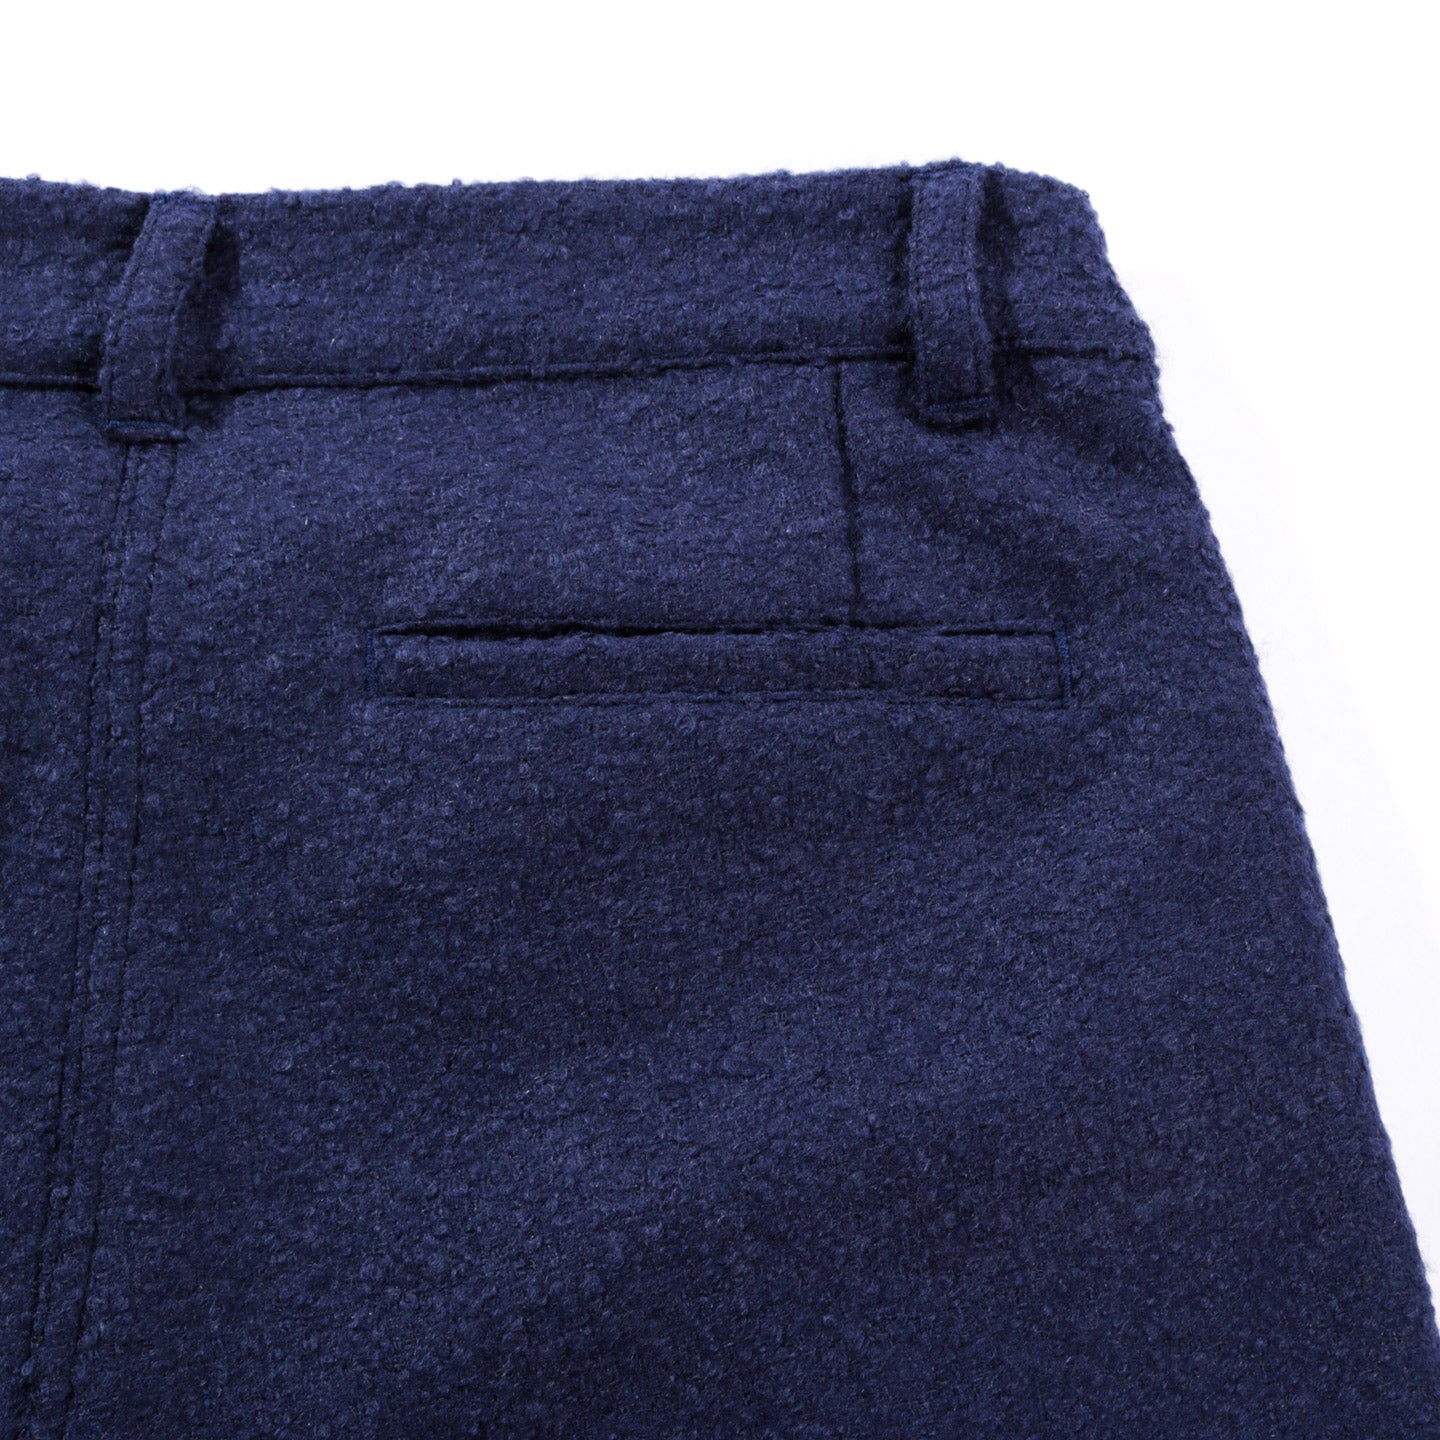 HOUSE OF ST. CLAIR SINGLE PLEAT TROUSER NAVY BOILED WOOL